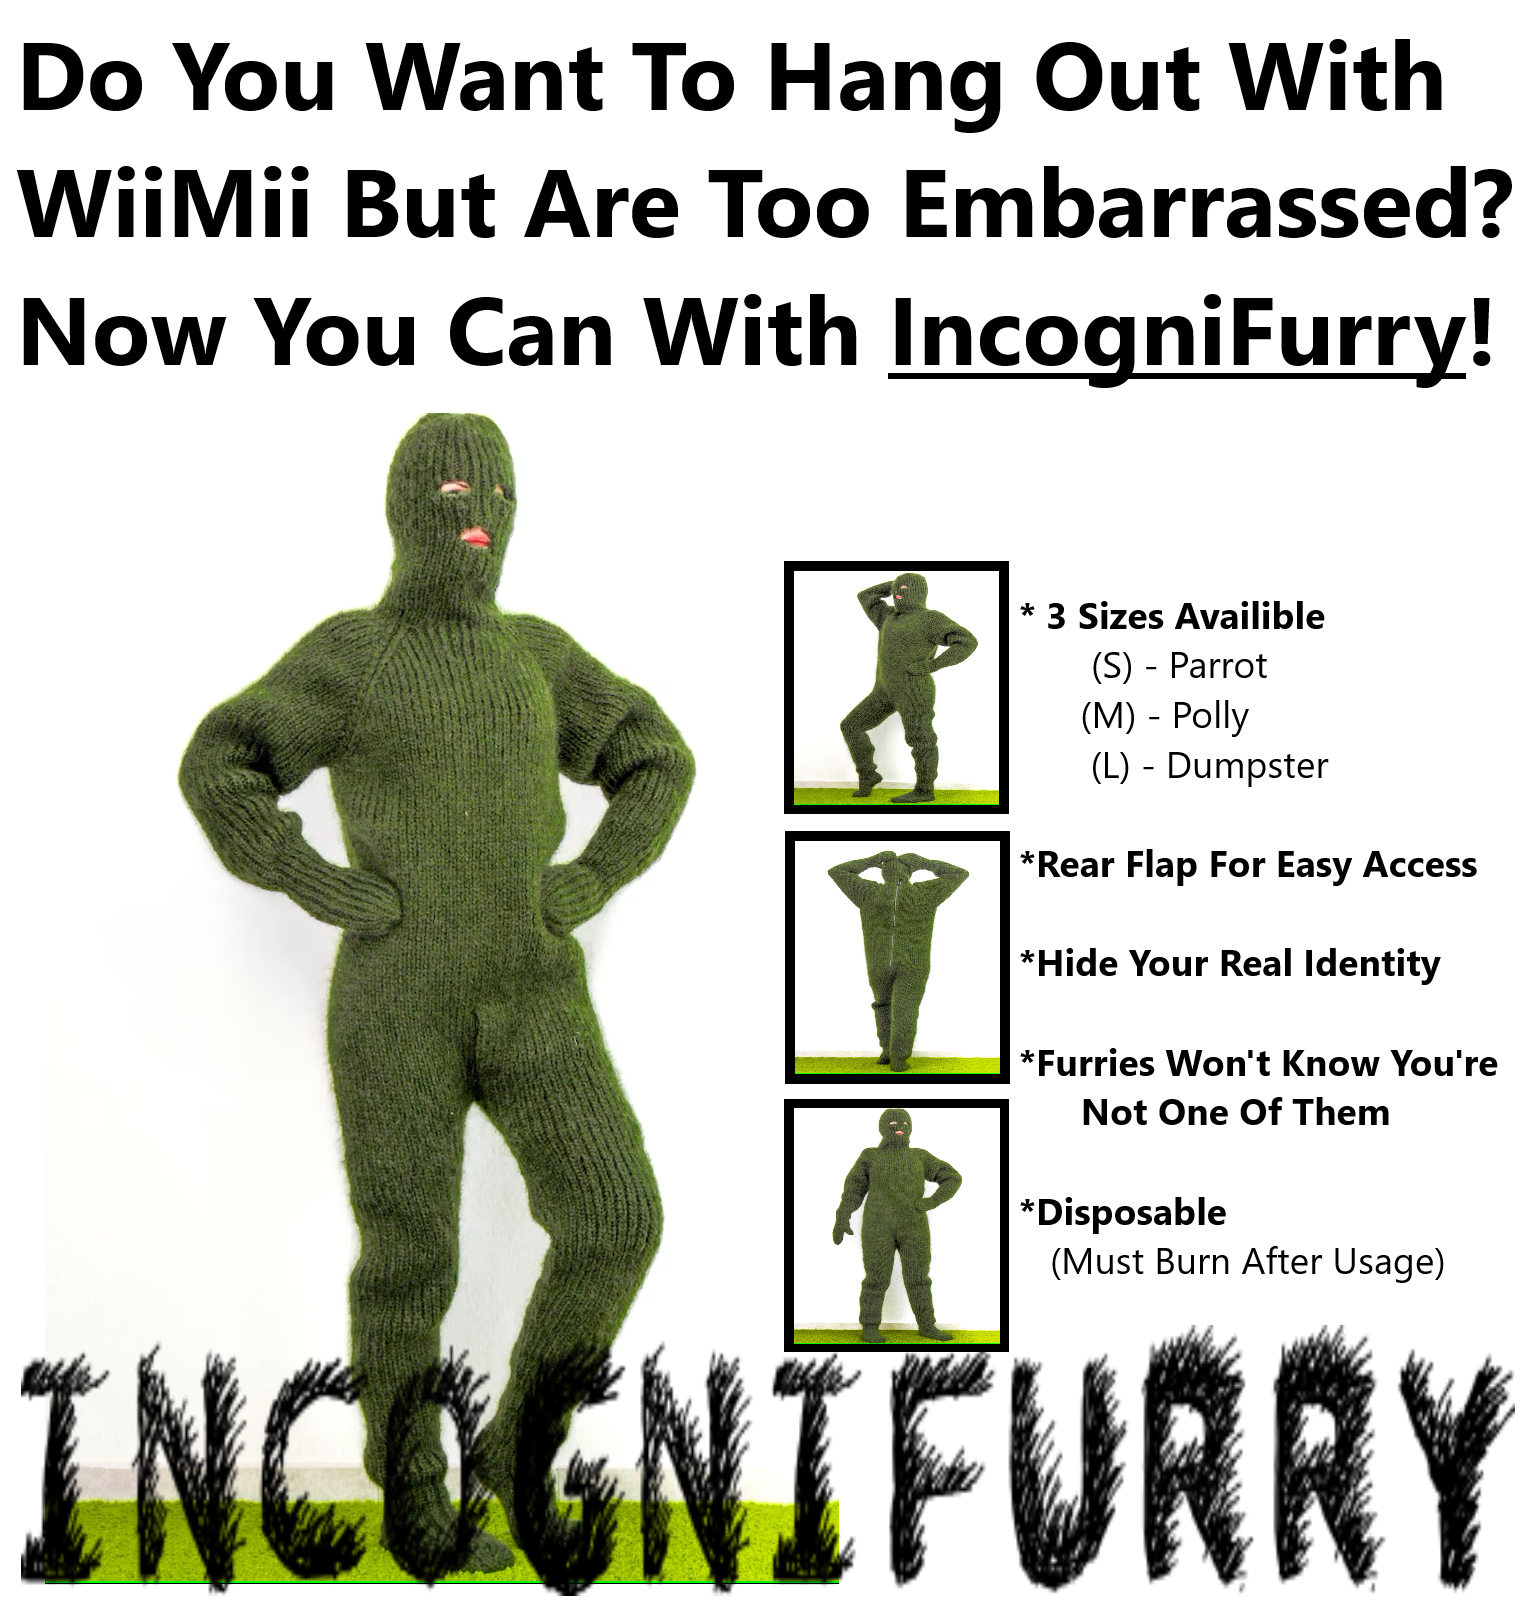 IncogniFurry.png